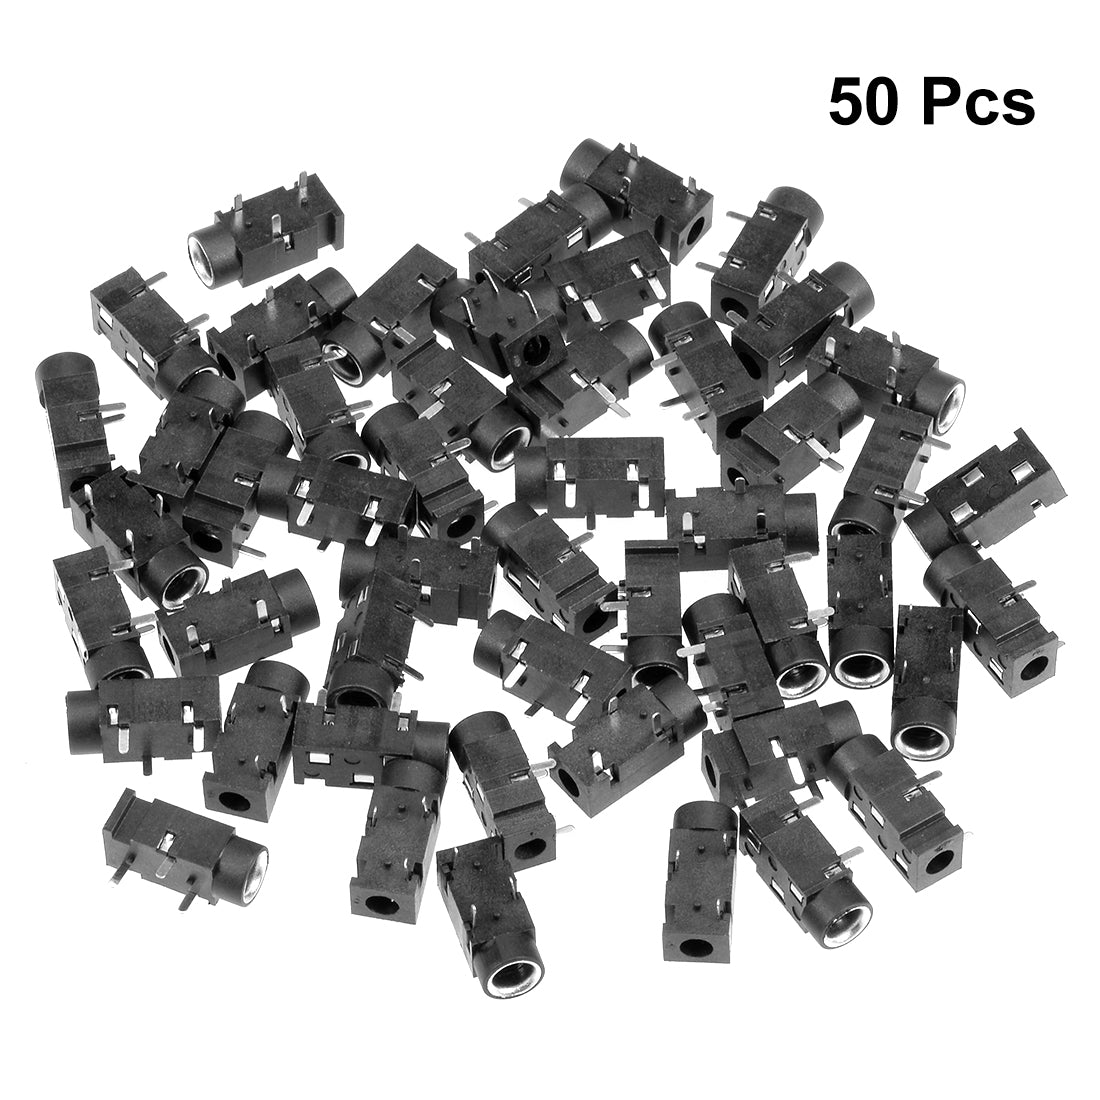 uxcell Uxcell 50Pcs PCB Mount 3.5mm 3 Pin Socket Headphone Stereo Jack Audio Video Connector Black PJ320